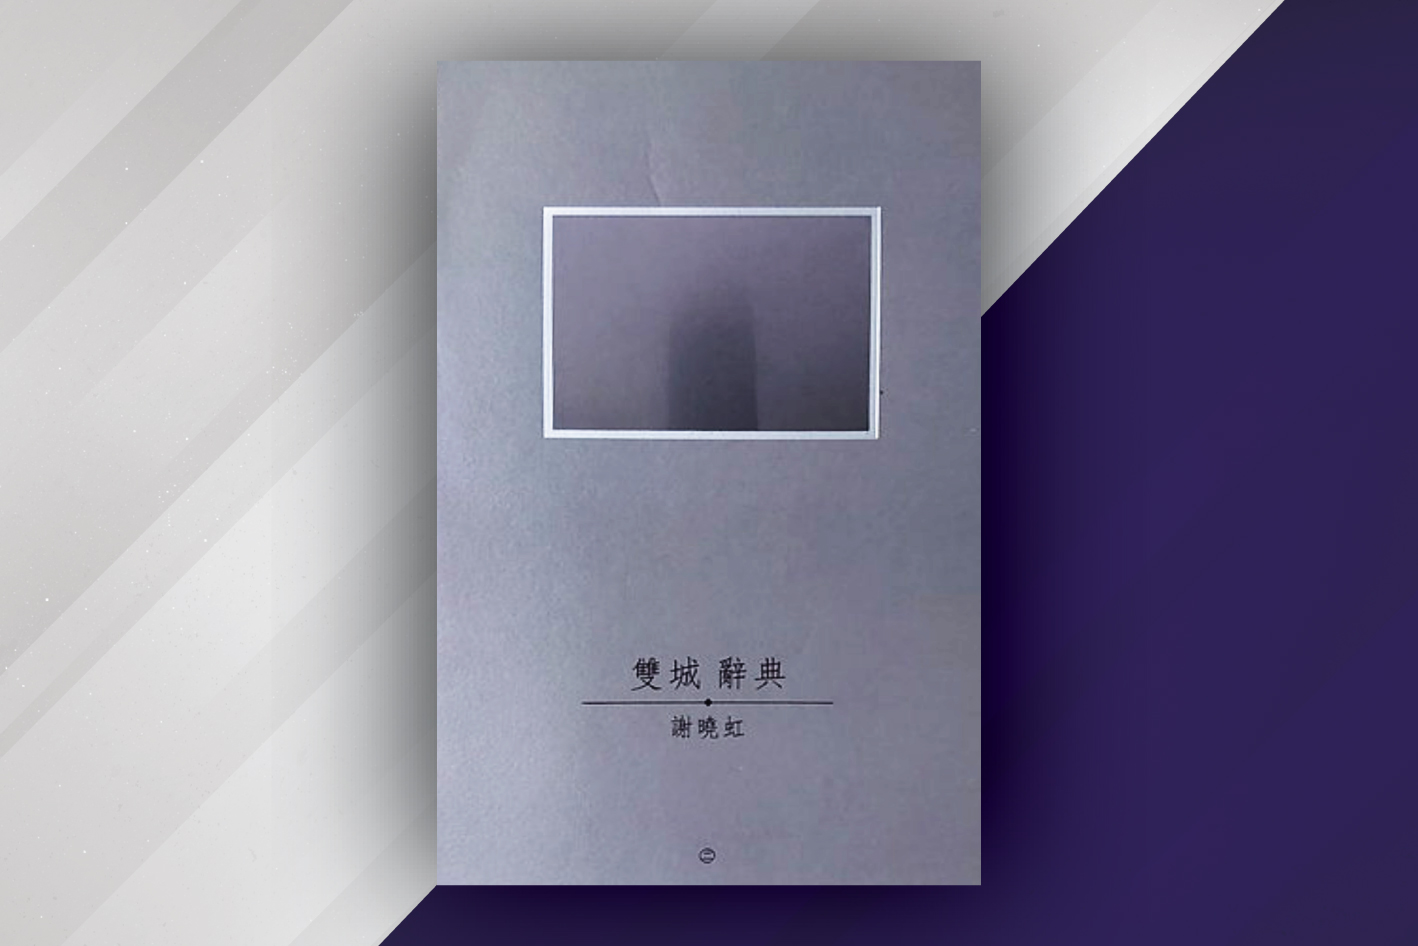 The Dictionary of Two Cities, Vol. 2 is a collection of stories that describe the people and events in Hong Kong based on newly-coined words.